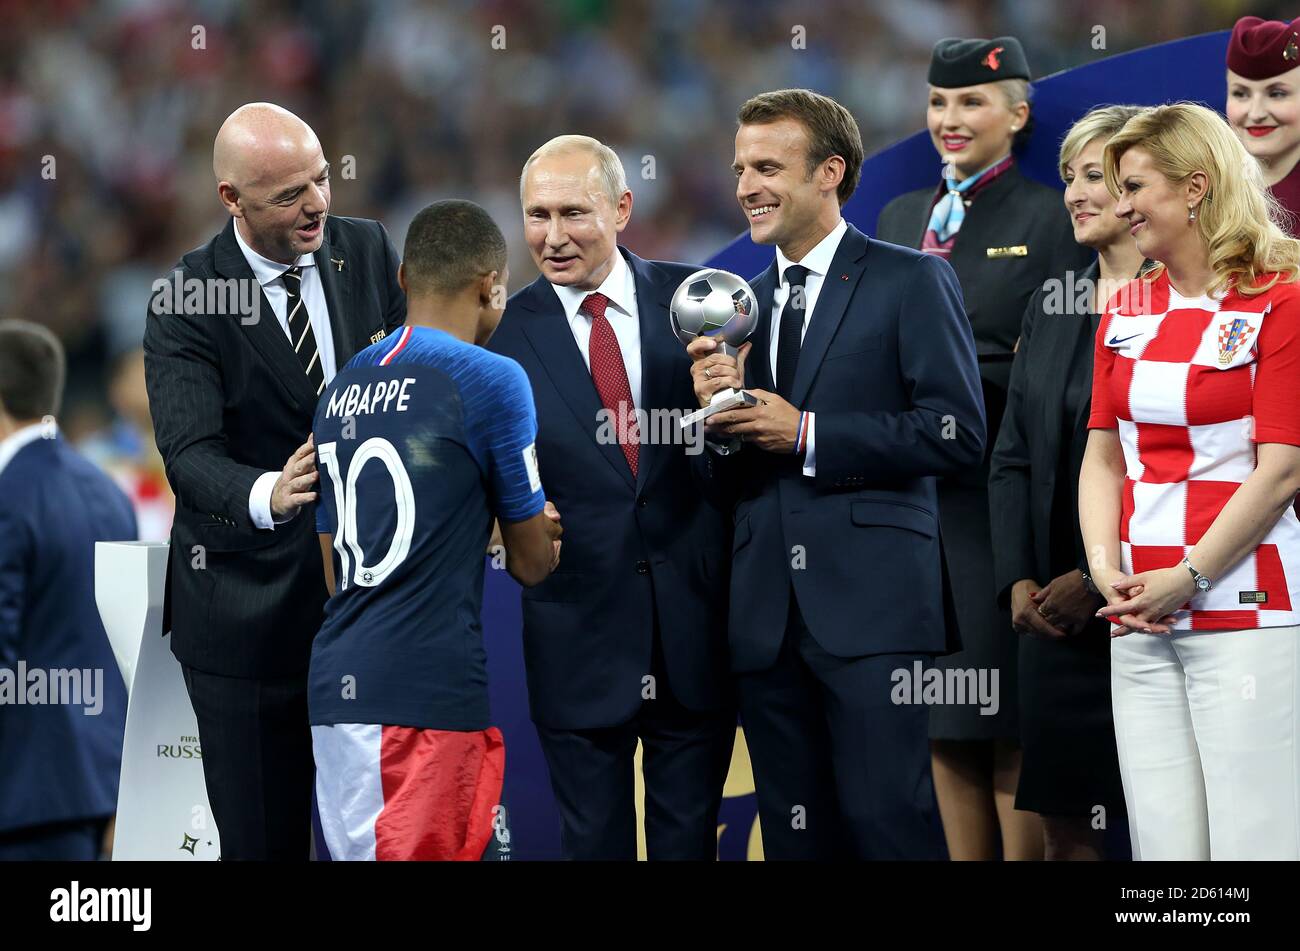 France's Kylian Mbappe receives the Best Young Player Award from FIFA President Gianni Infantino (left), Russian President Vladimir Putin (centre), French President Emmanuel Macron (rigth) after the FIFA World Cup 2018 final at the Luzhniki Stadium in Moscow, 15th July 2018 Stock Photo